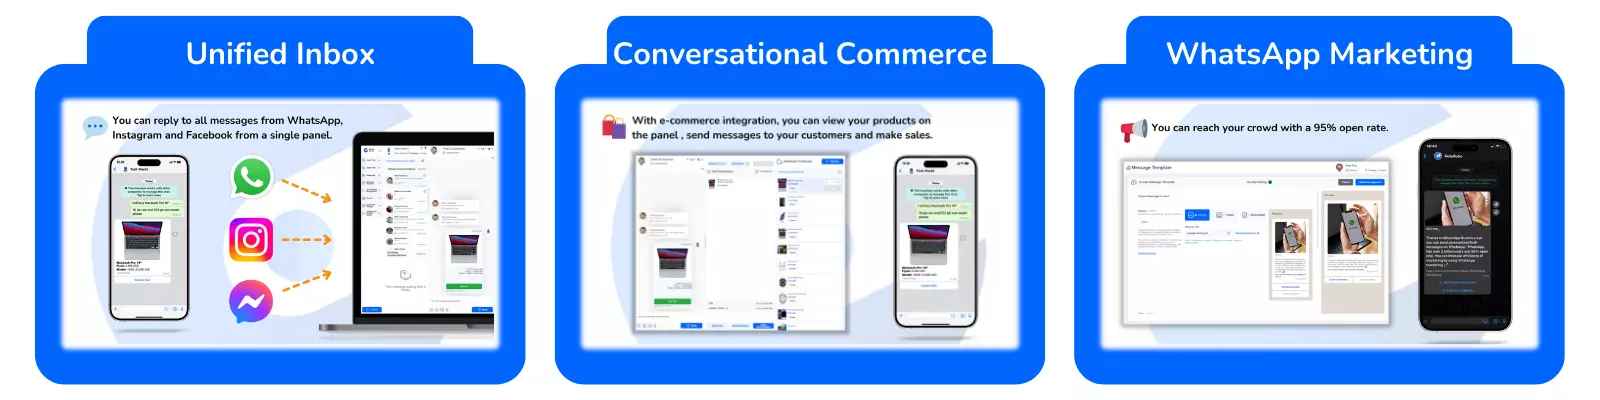 AnyConv.com  EN eticaret - 3 Times More Revenue with Conversational Commerce in the Unified Inbox: Alternative to E-Commerce